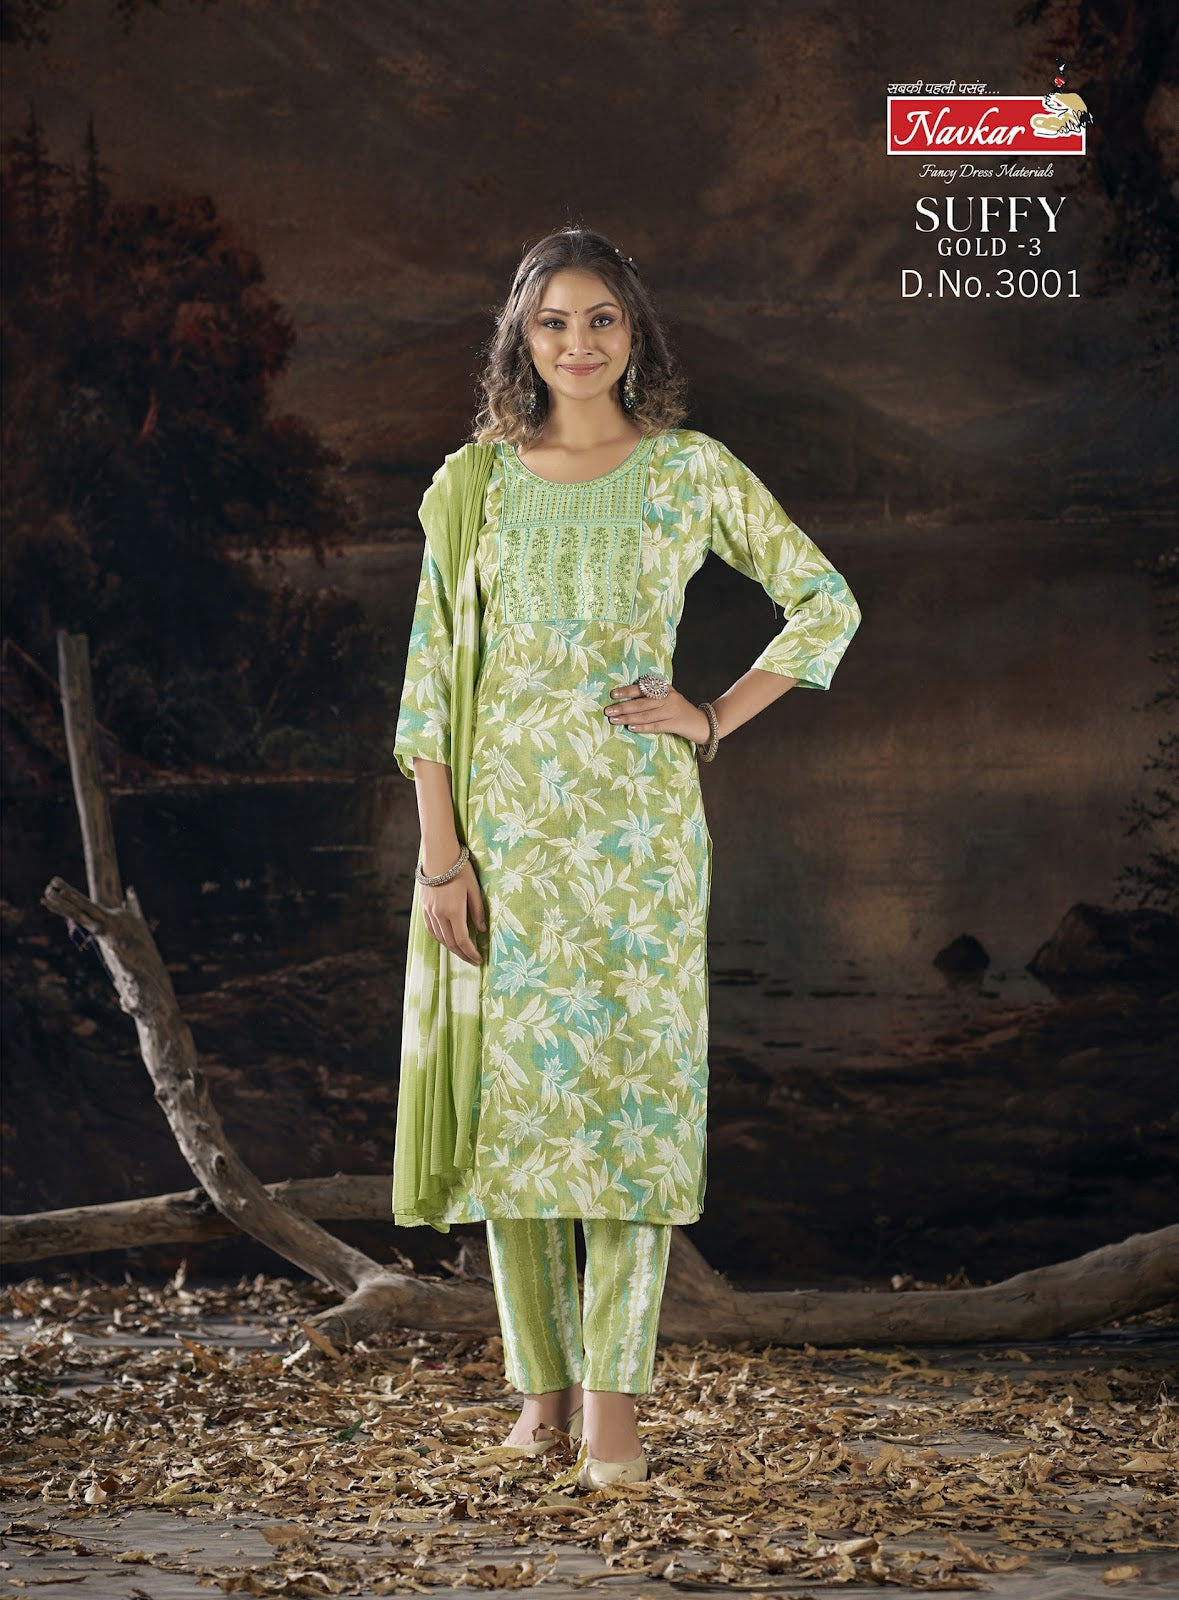 Suffy Gold 3 Navkar Rayon Foil Readymade Pant Style Suits